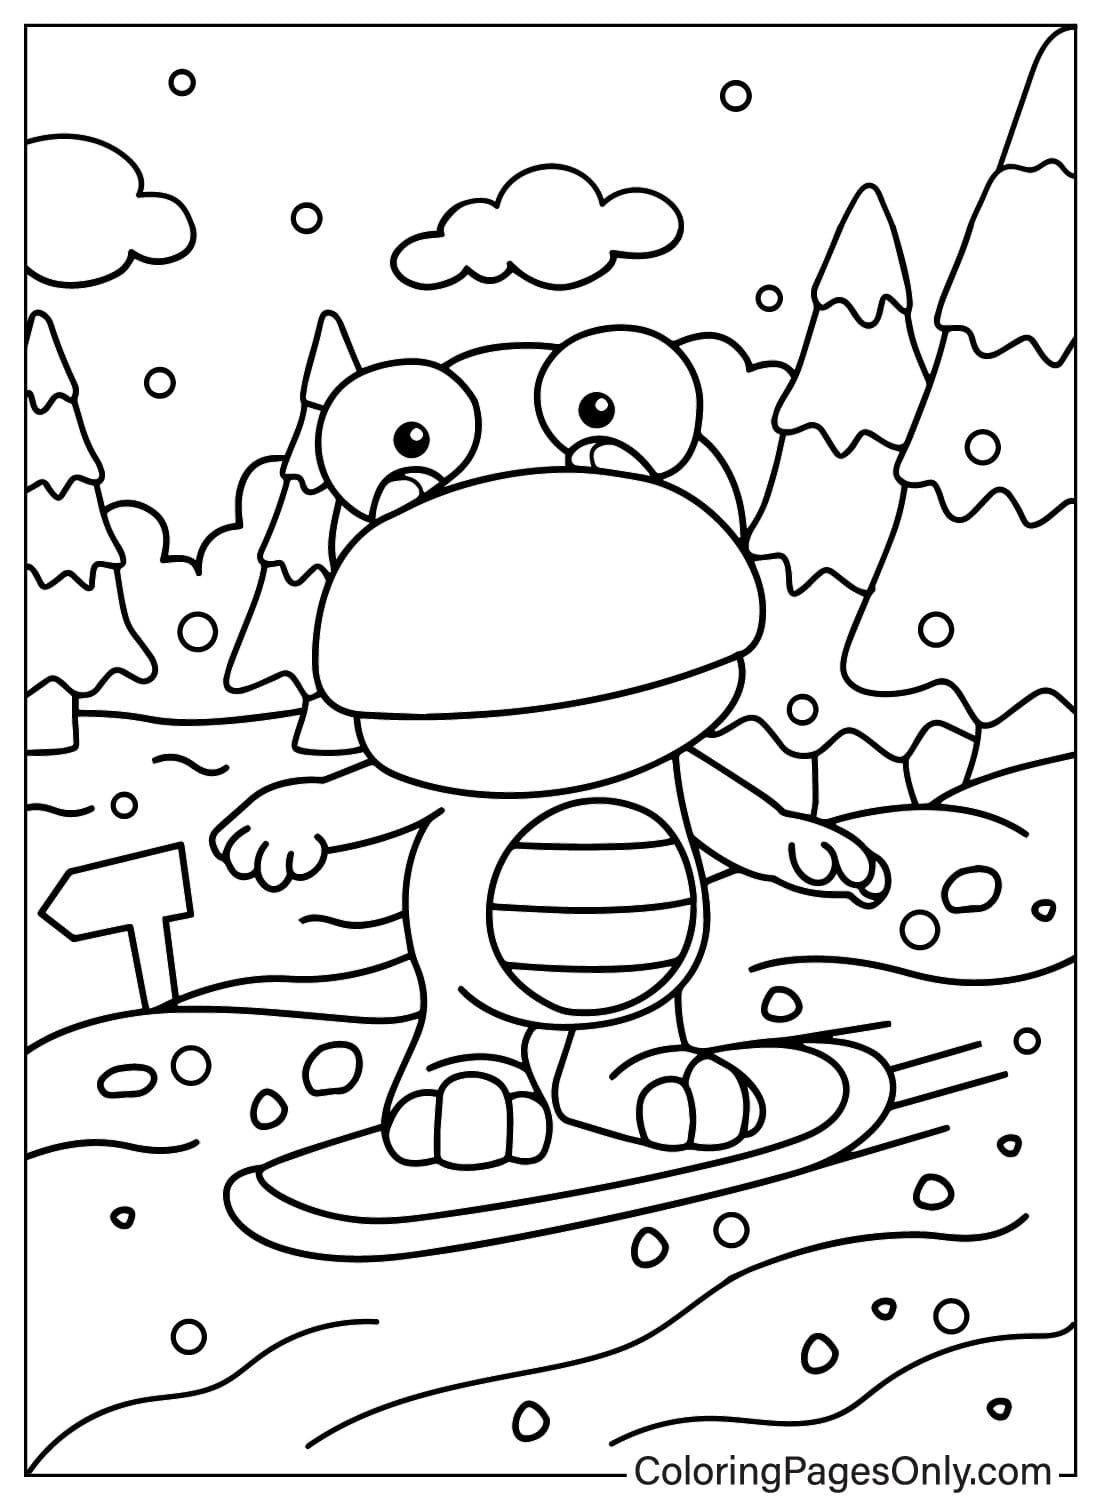 Free Crong Coloring Page from Pororo the Little Penguin